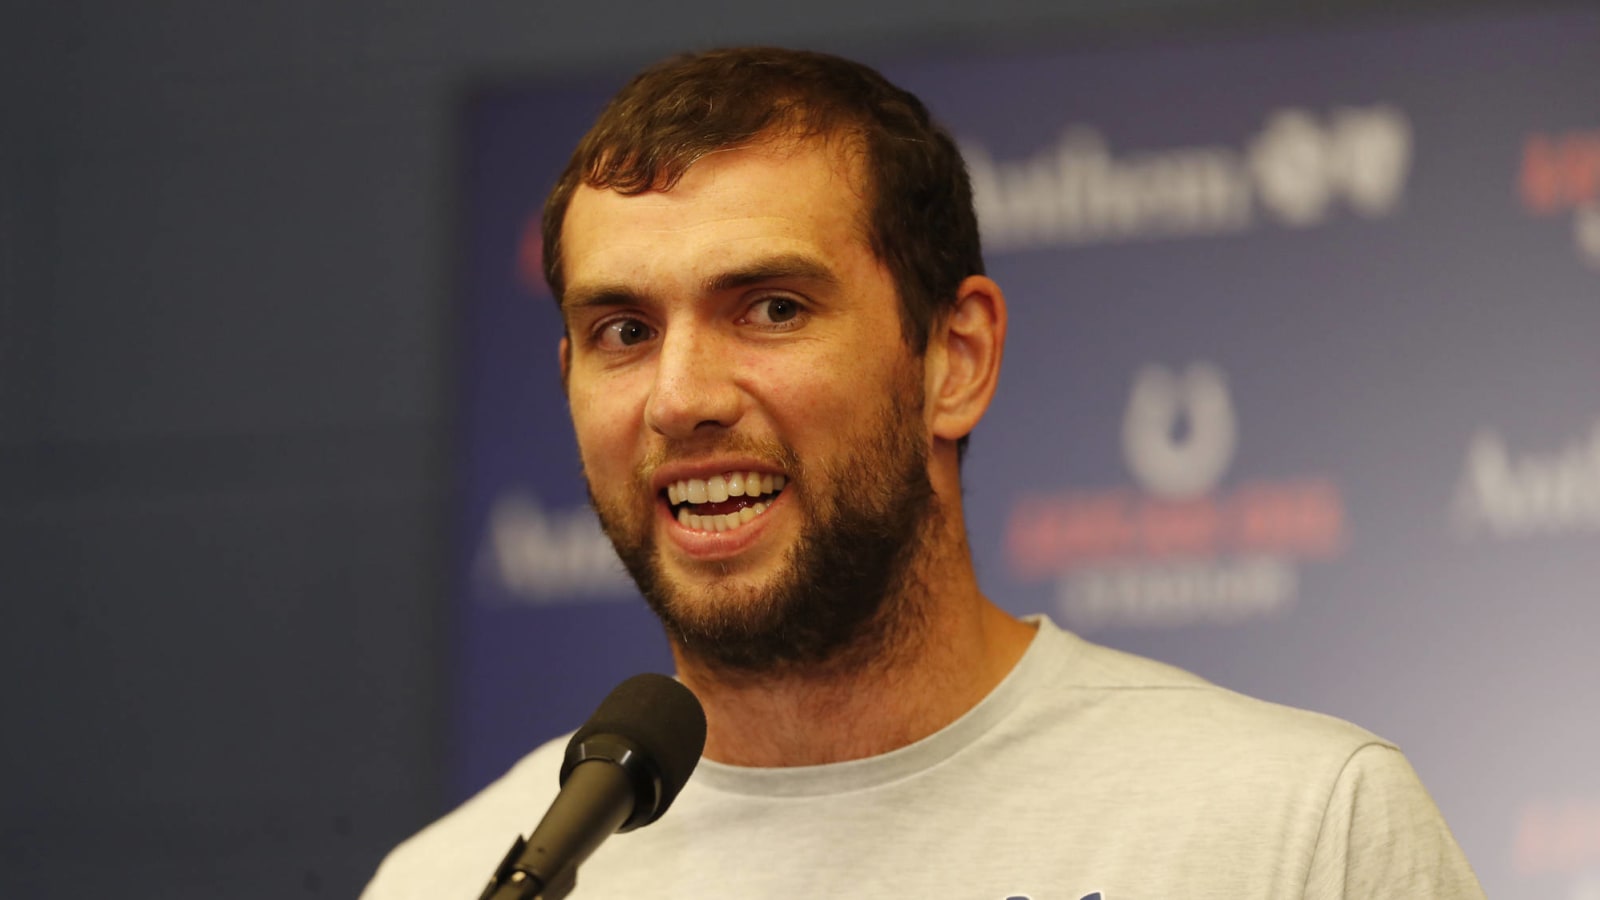 Report: Andrew Luck doing ‘really well’ after retirement, NFL return unlikely